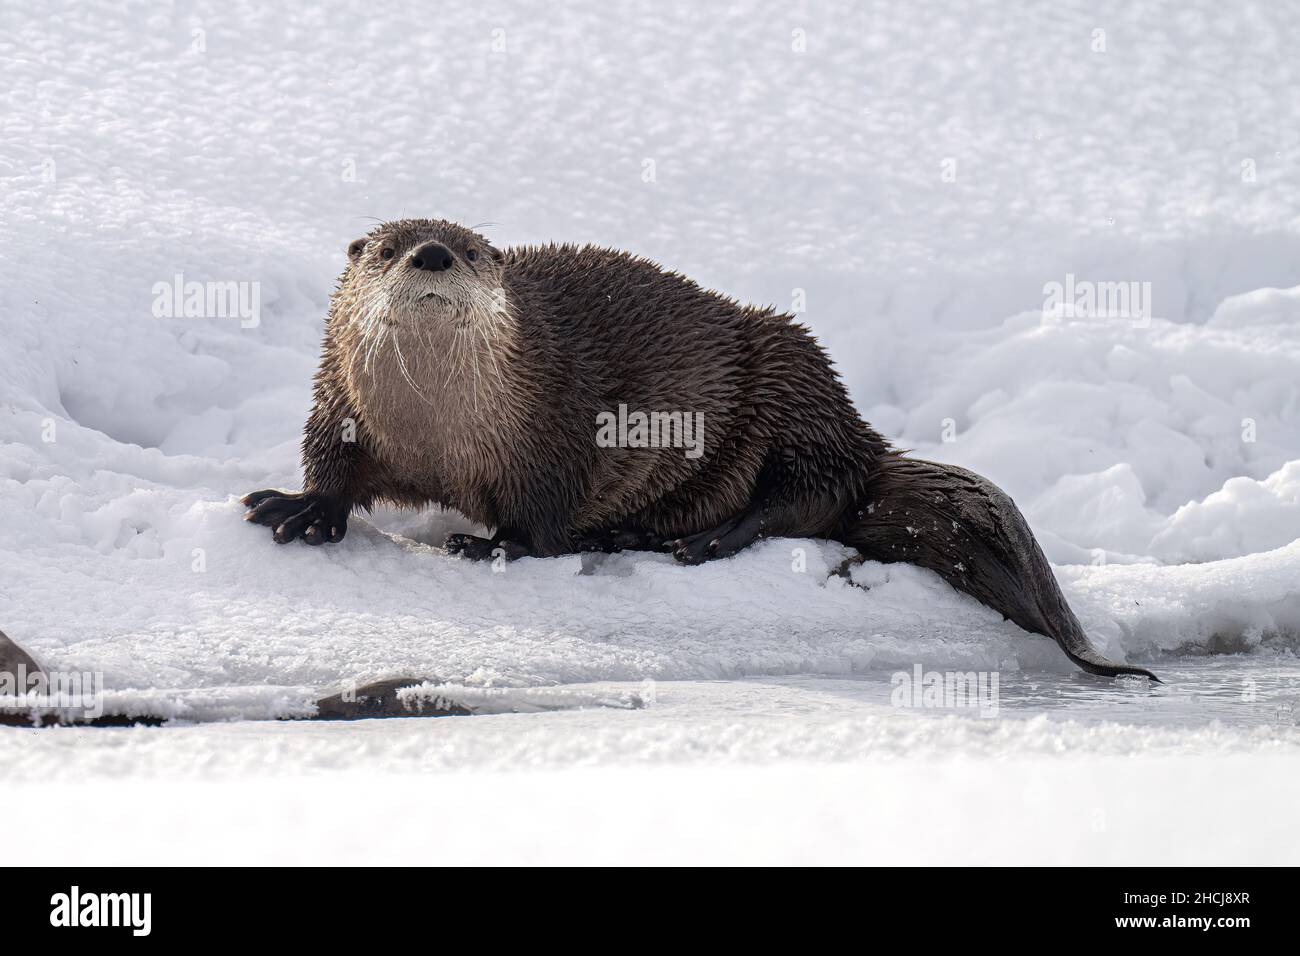 River otter in snow Stock Photo